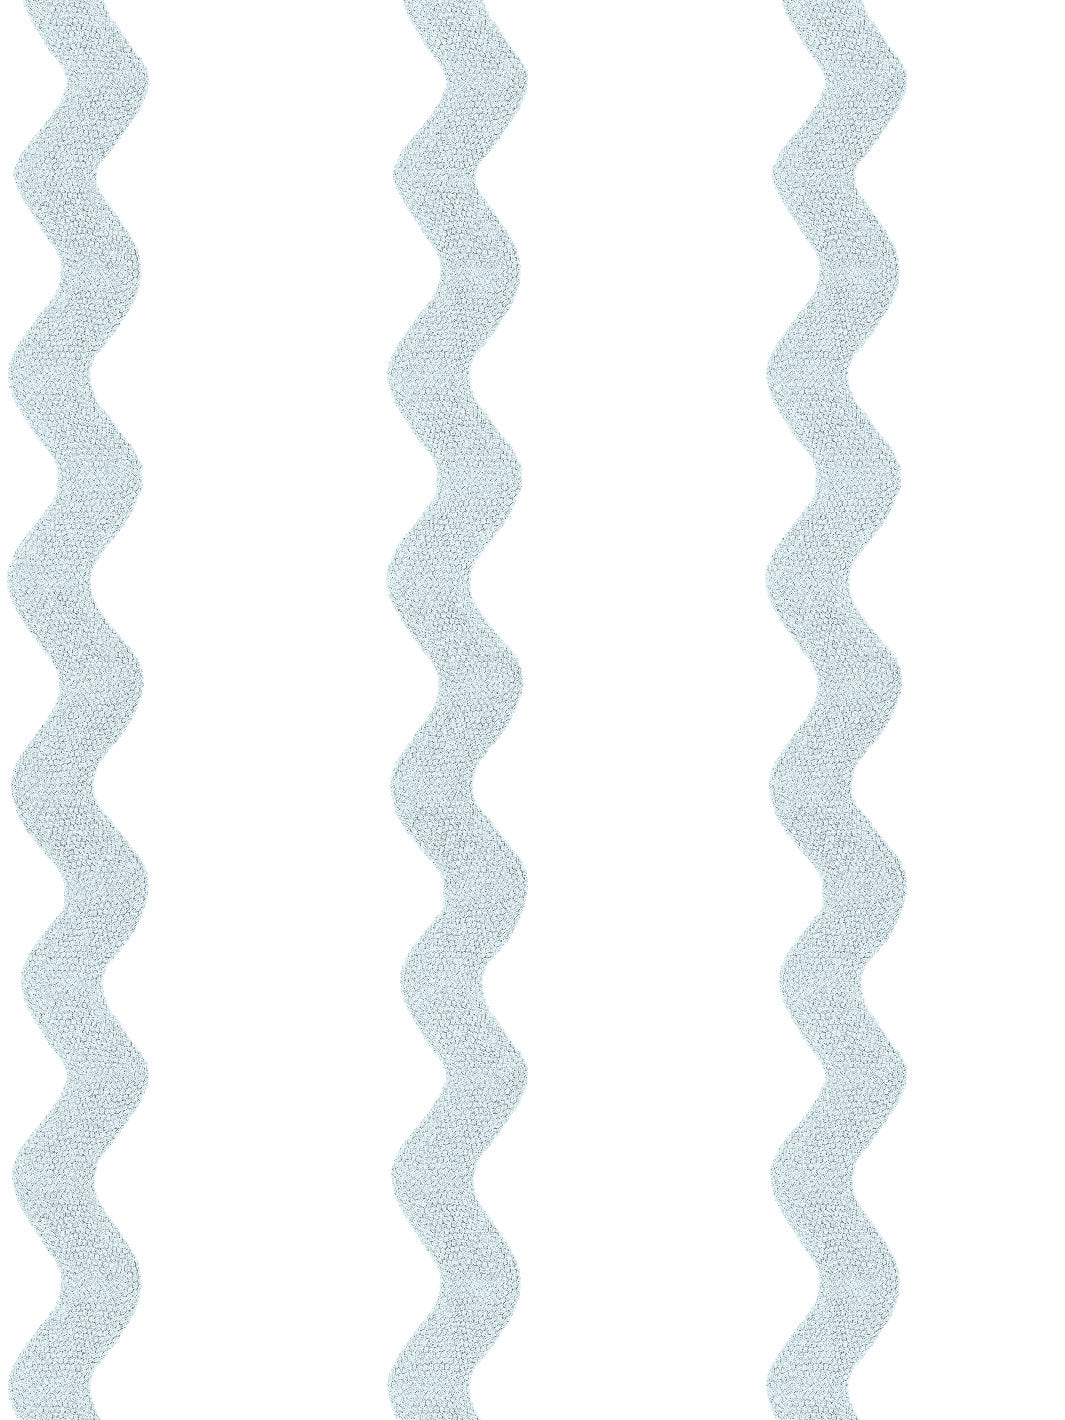 'Ric-Rac Stripe on White' Wallpaper by Sarah Jessica Parker - Silver